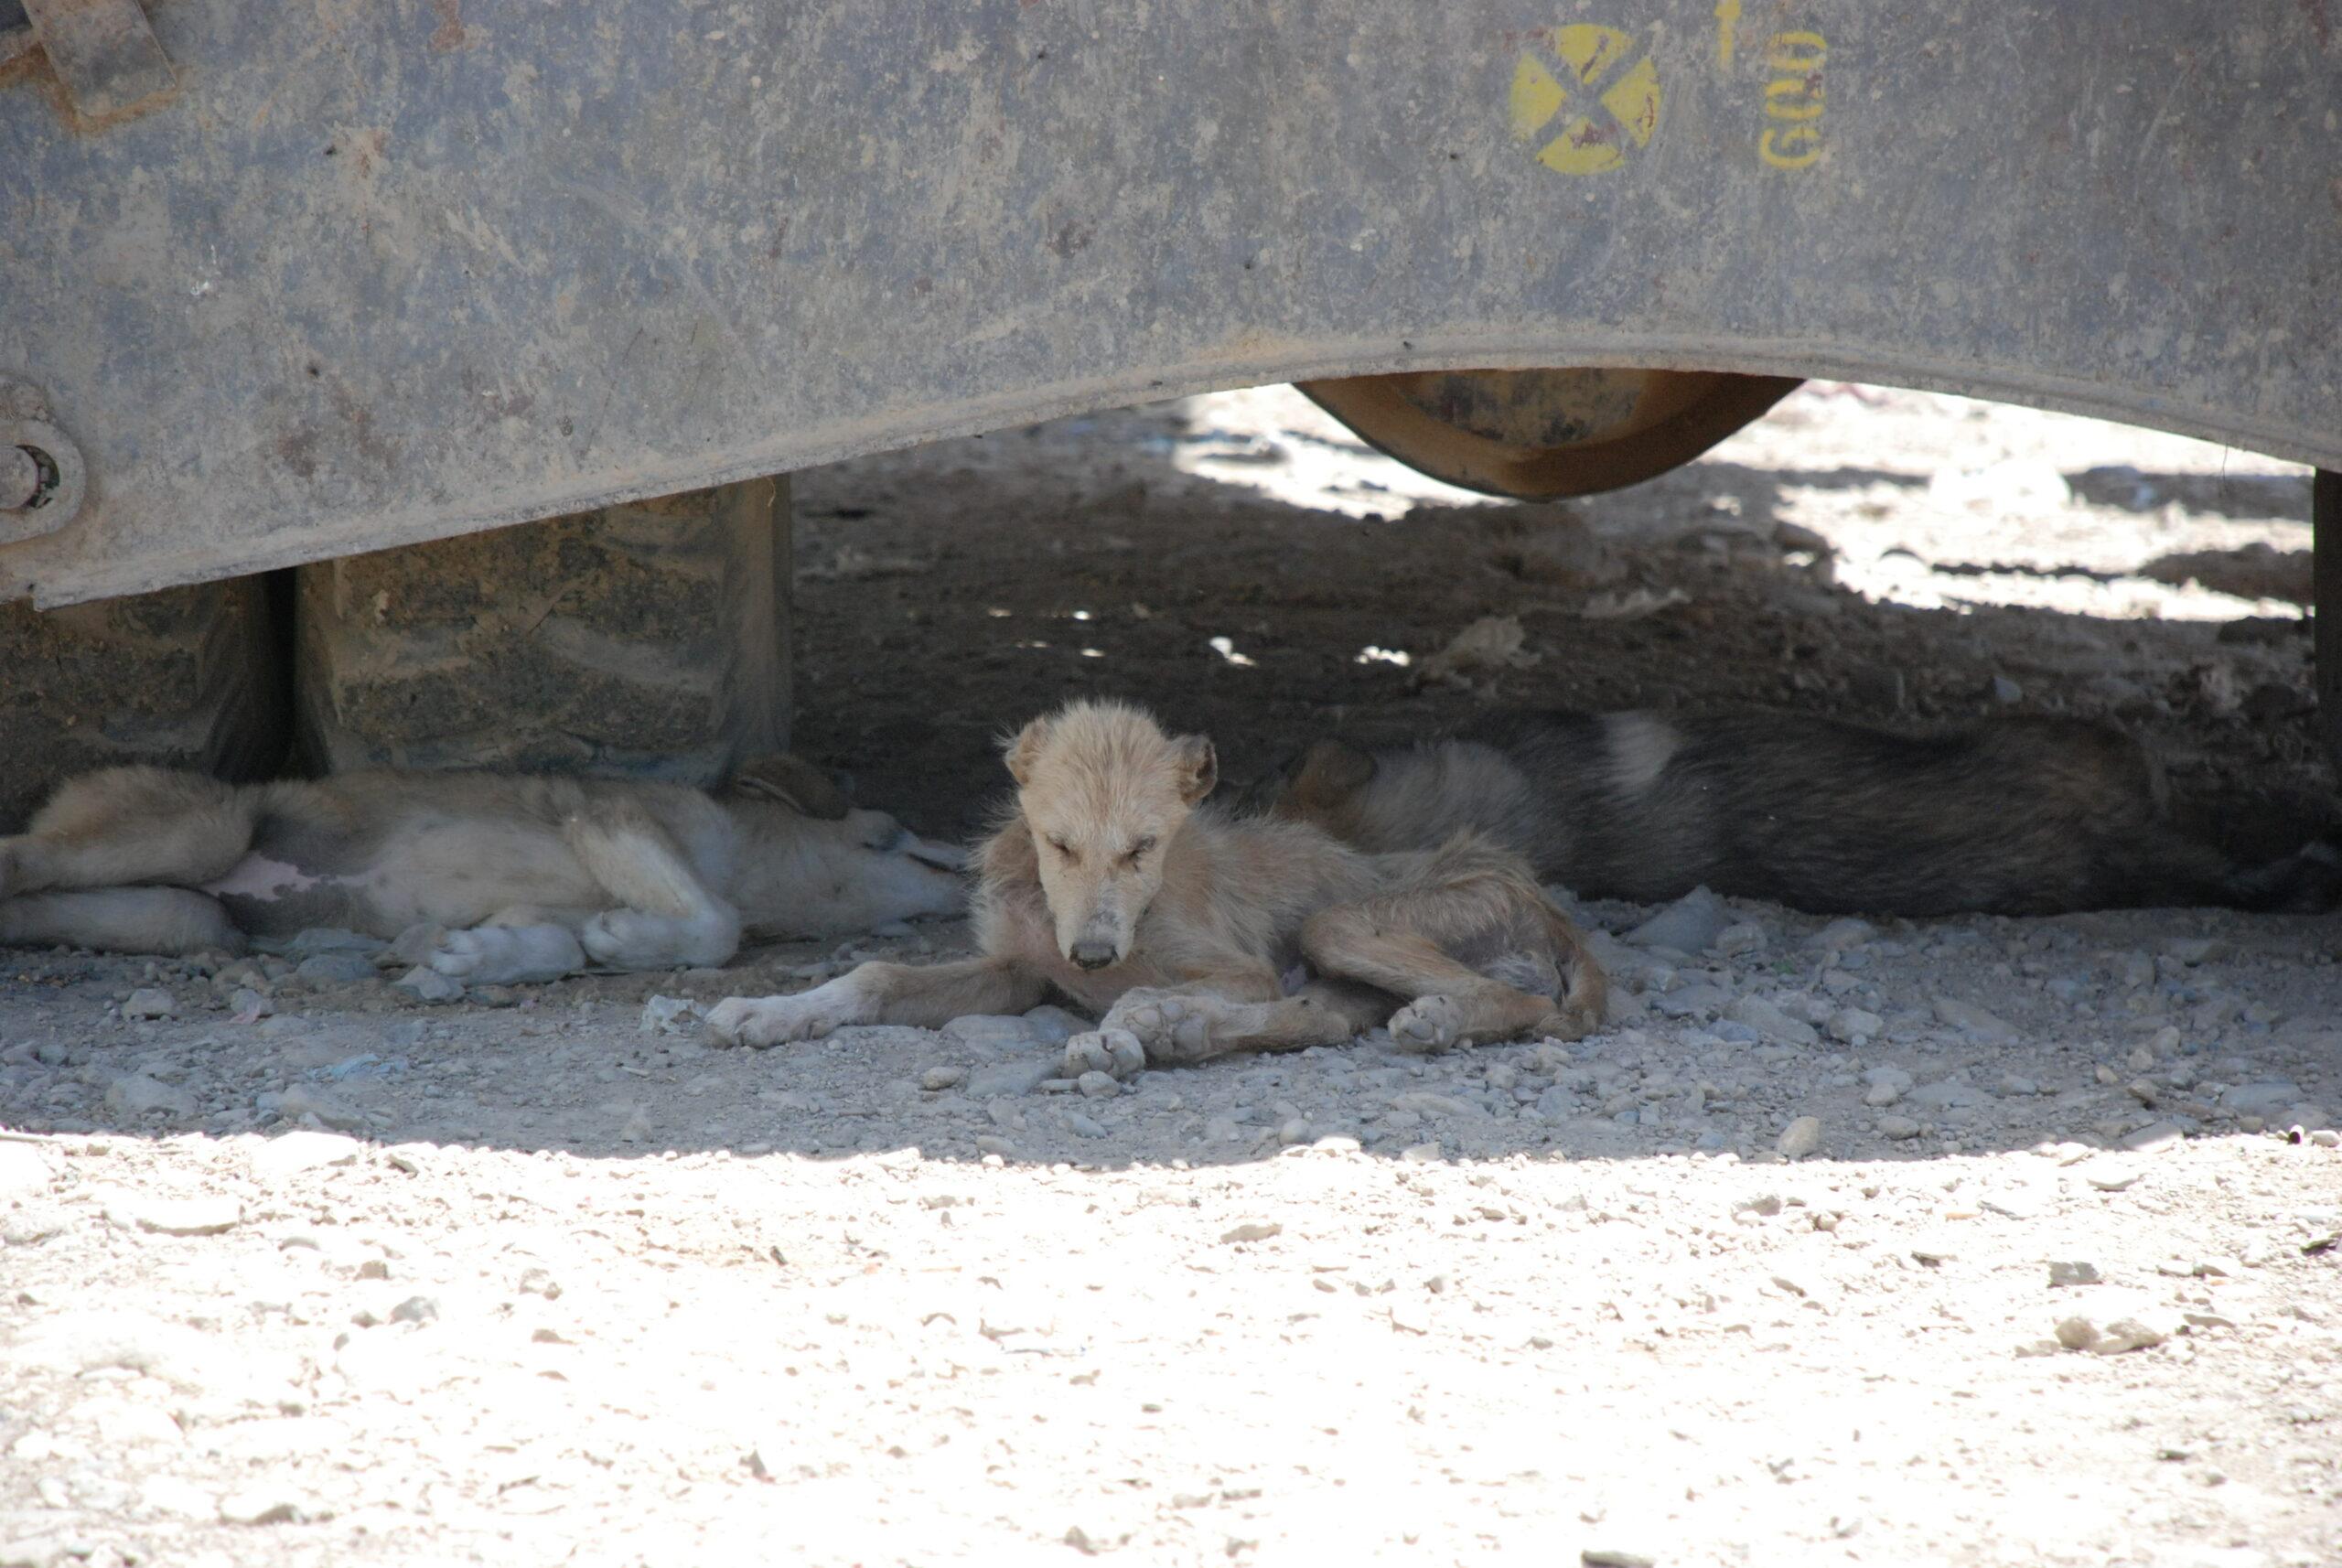 Kabul residents complain about stray dogs